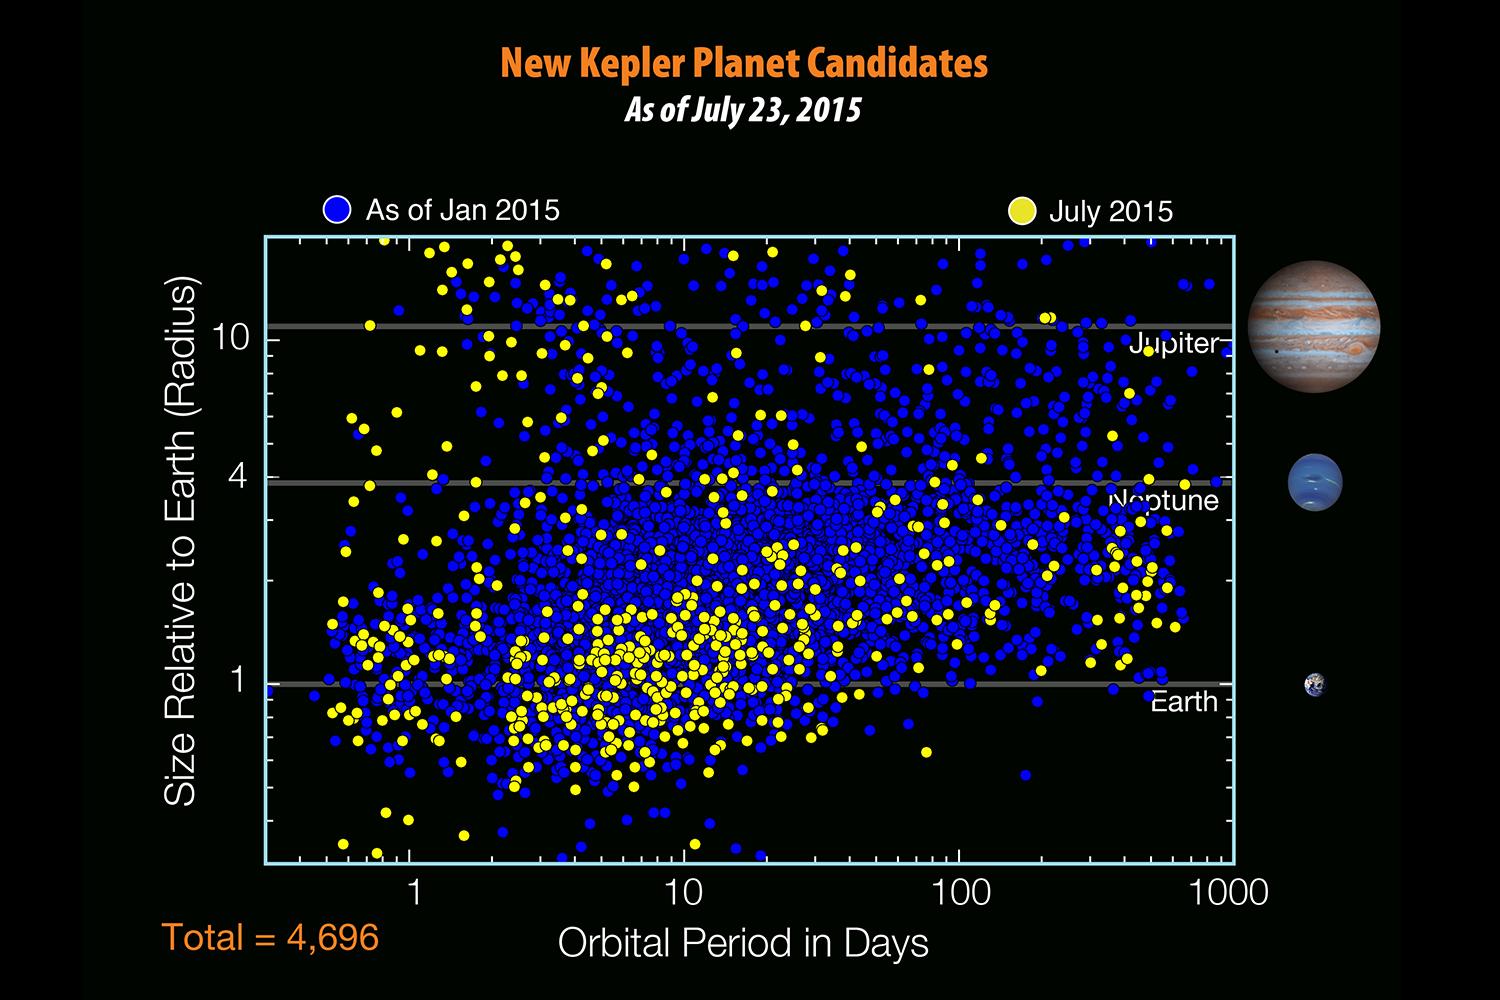 nasa announces kepler 452b exoplanet discovery fig10 new planet cand